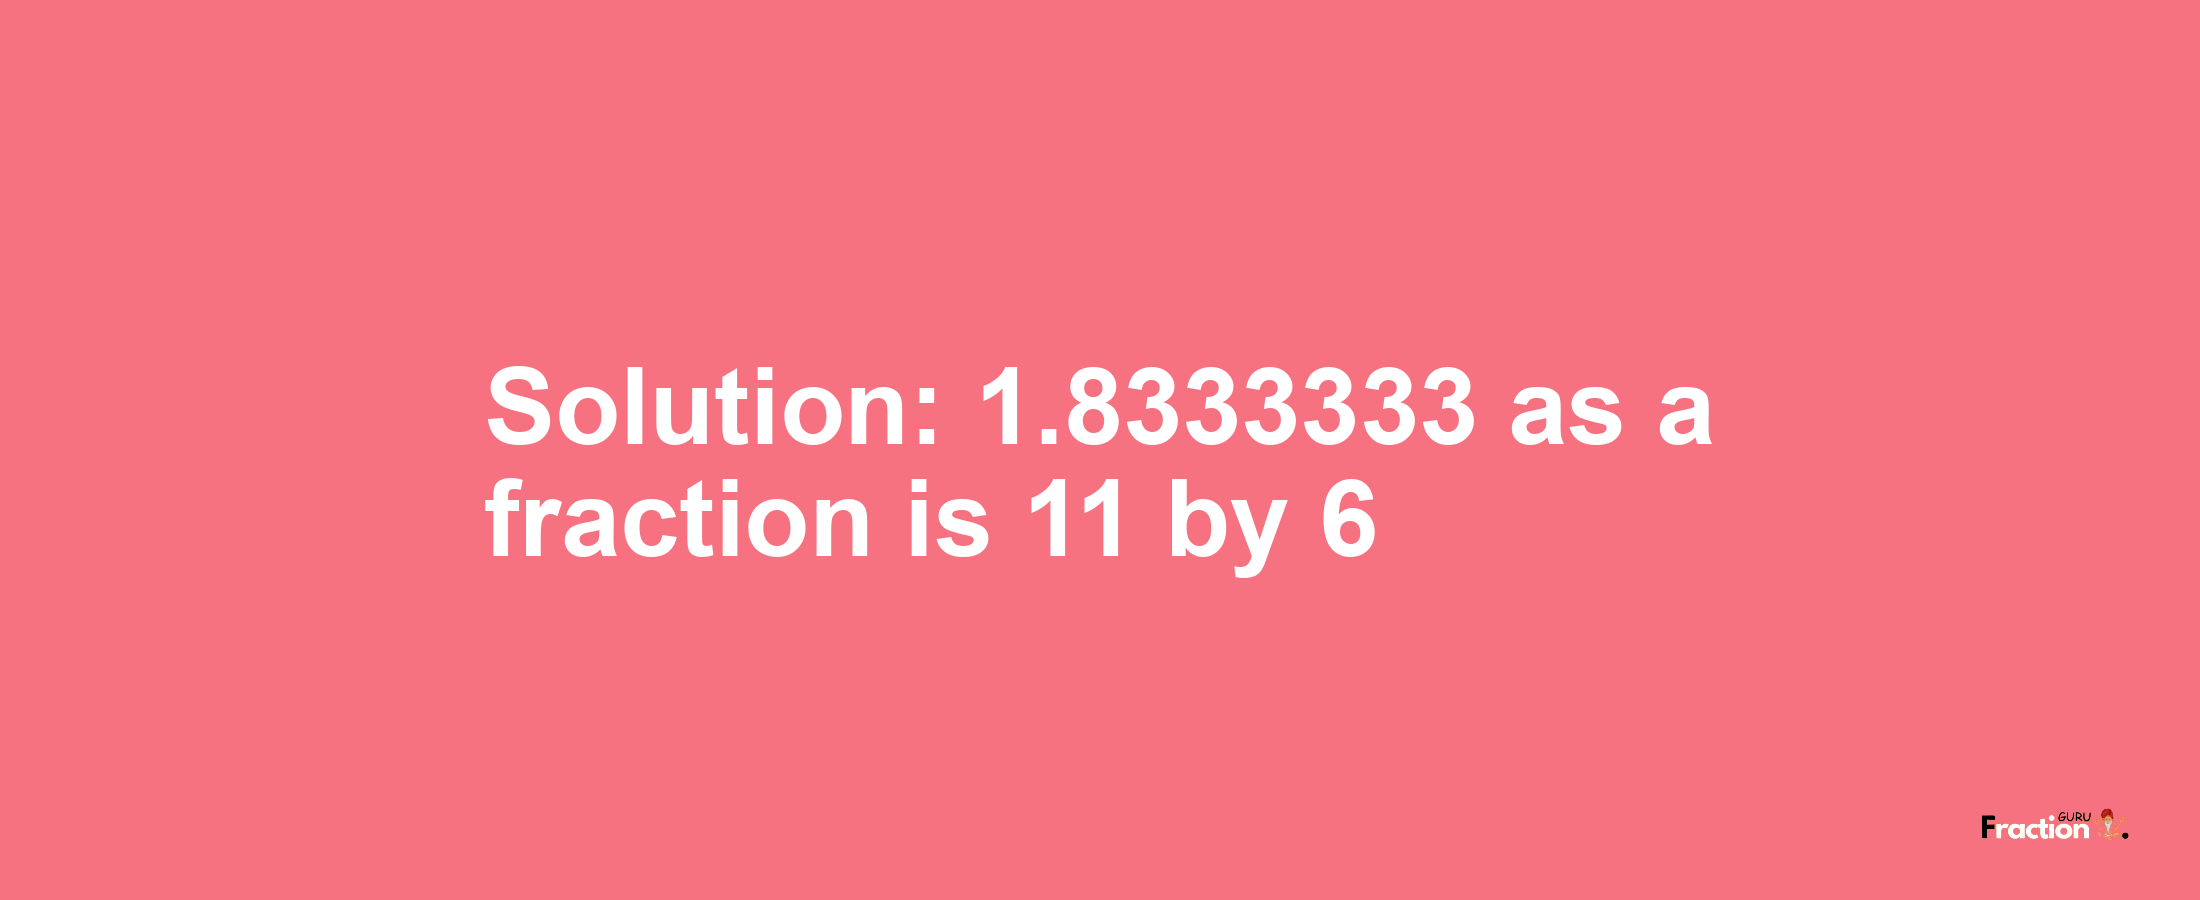 Solution:1.8333333 as a fraction is 11/6